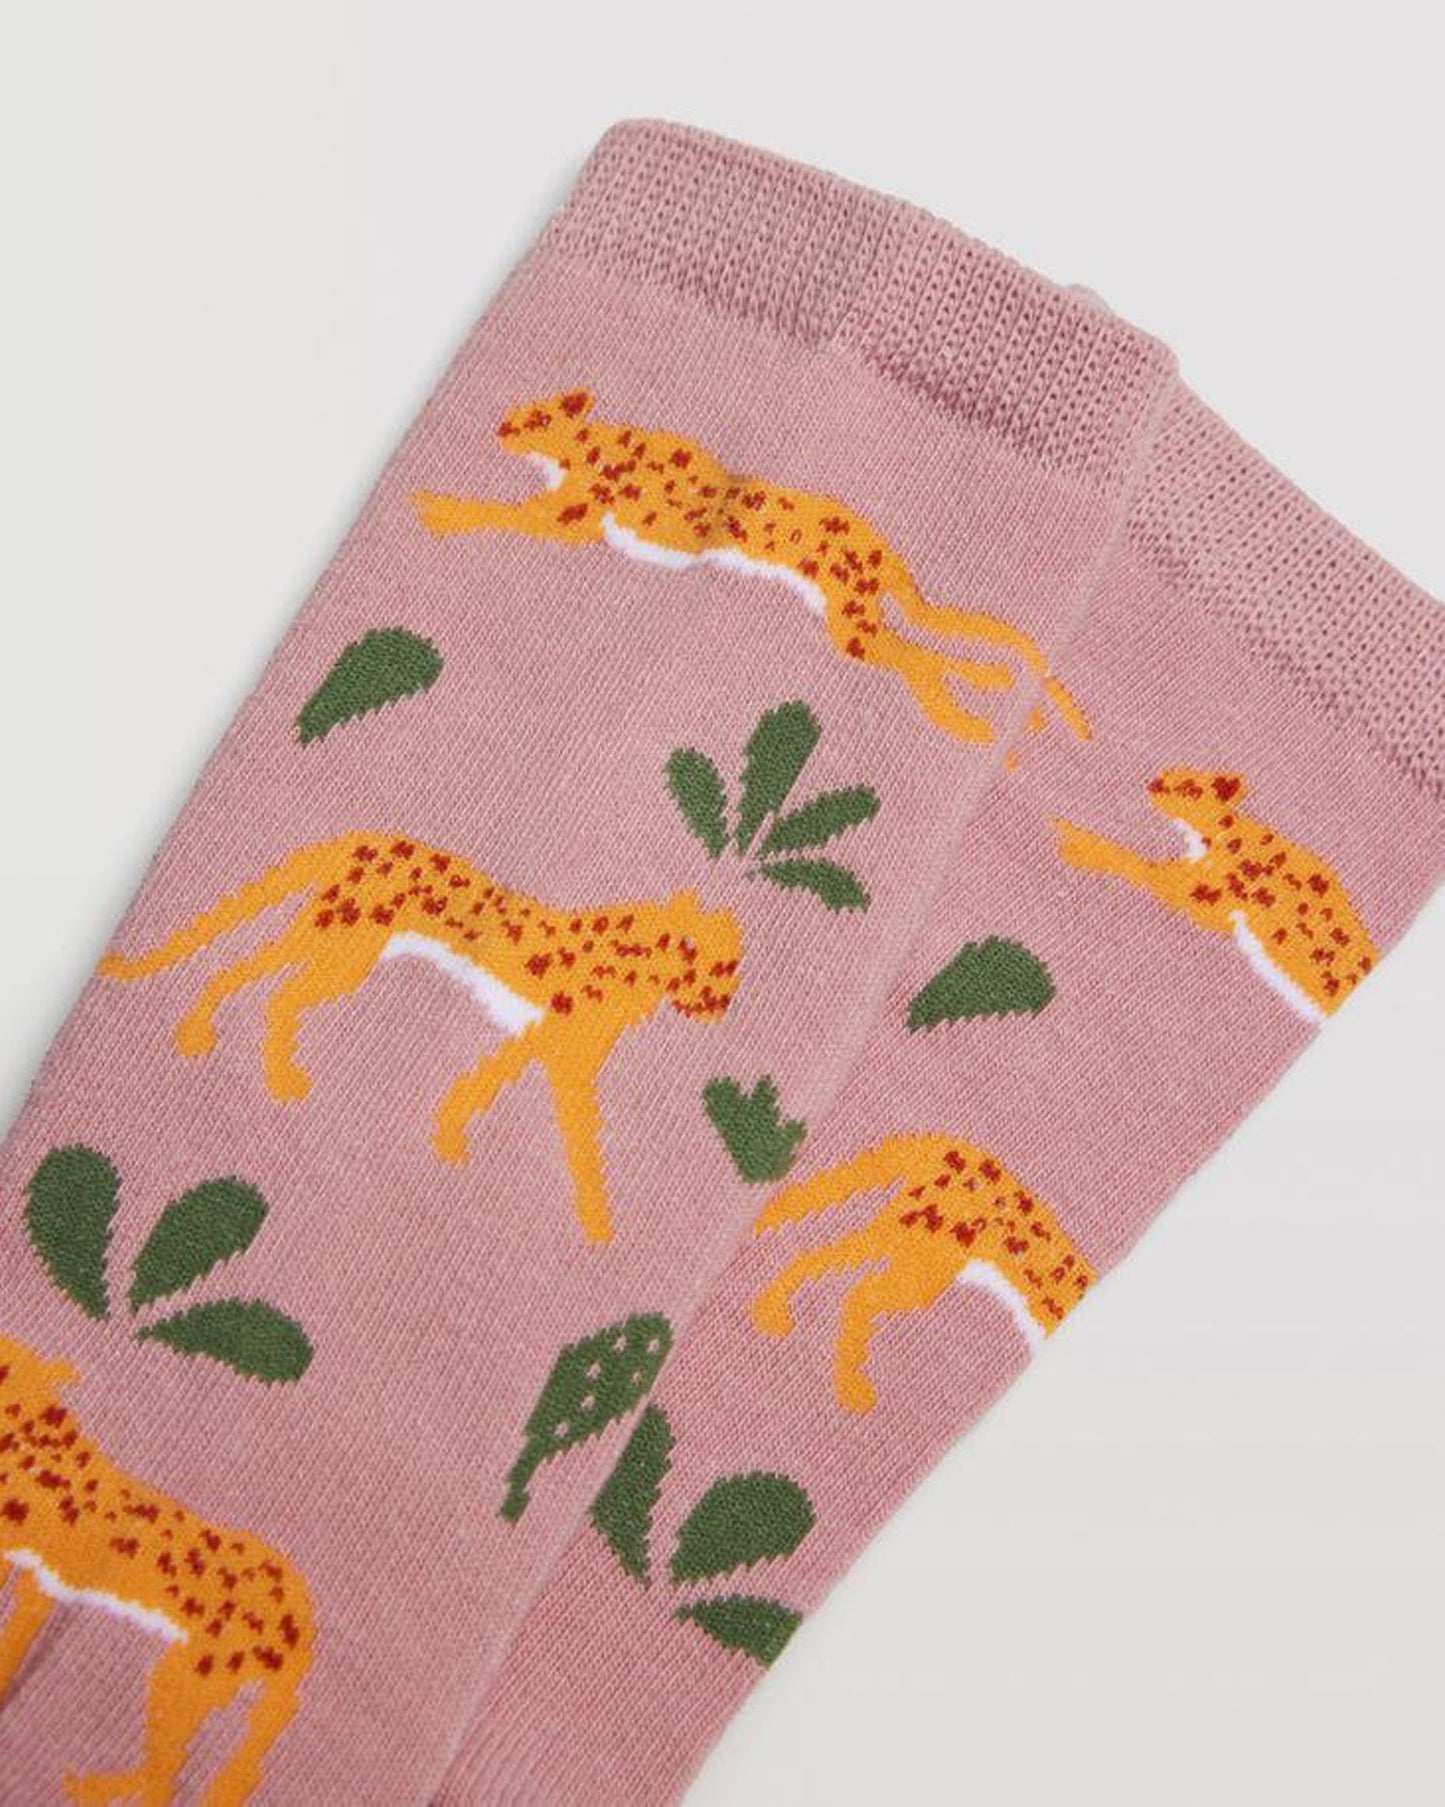 Ysabel Mora 12875 Cheetah Socks - Pale pink cotton crew socks with a pattern of cheetahs in mustard, white and wine and green cactus leaves and plain elasticated cuff.